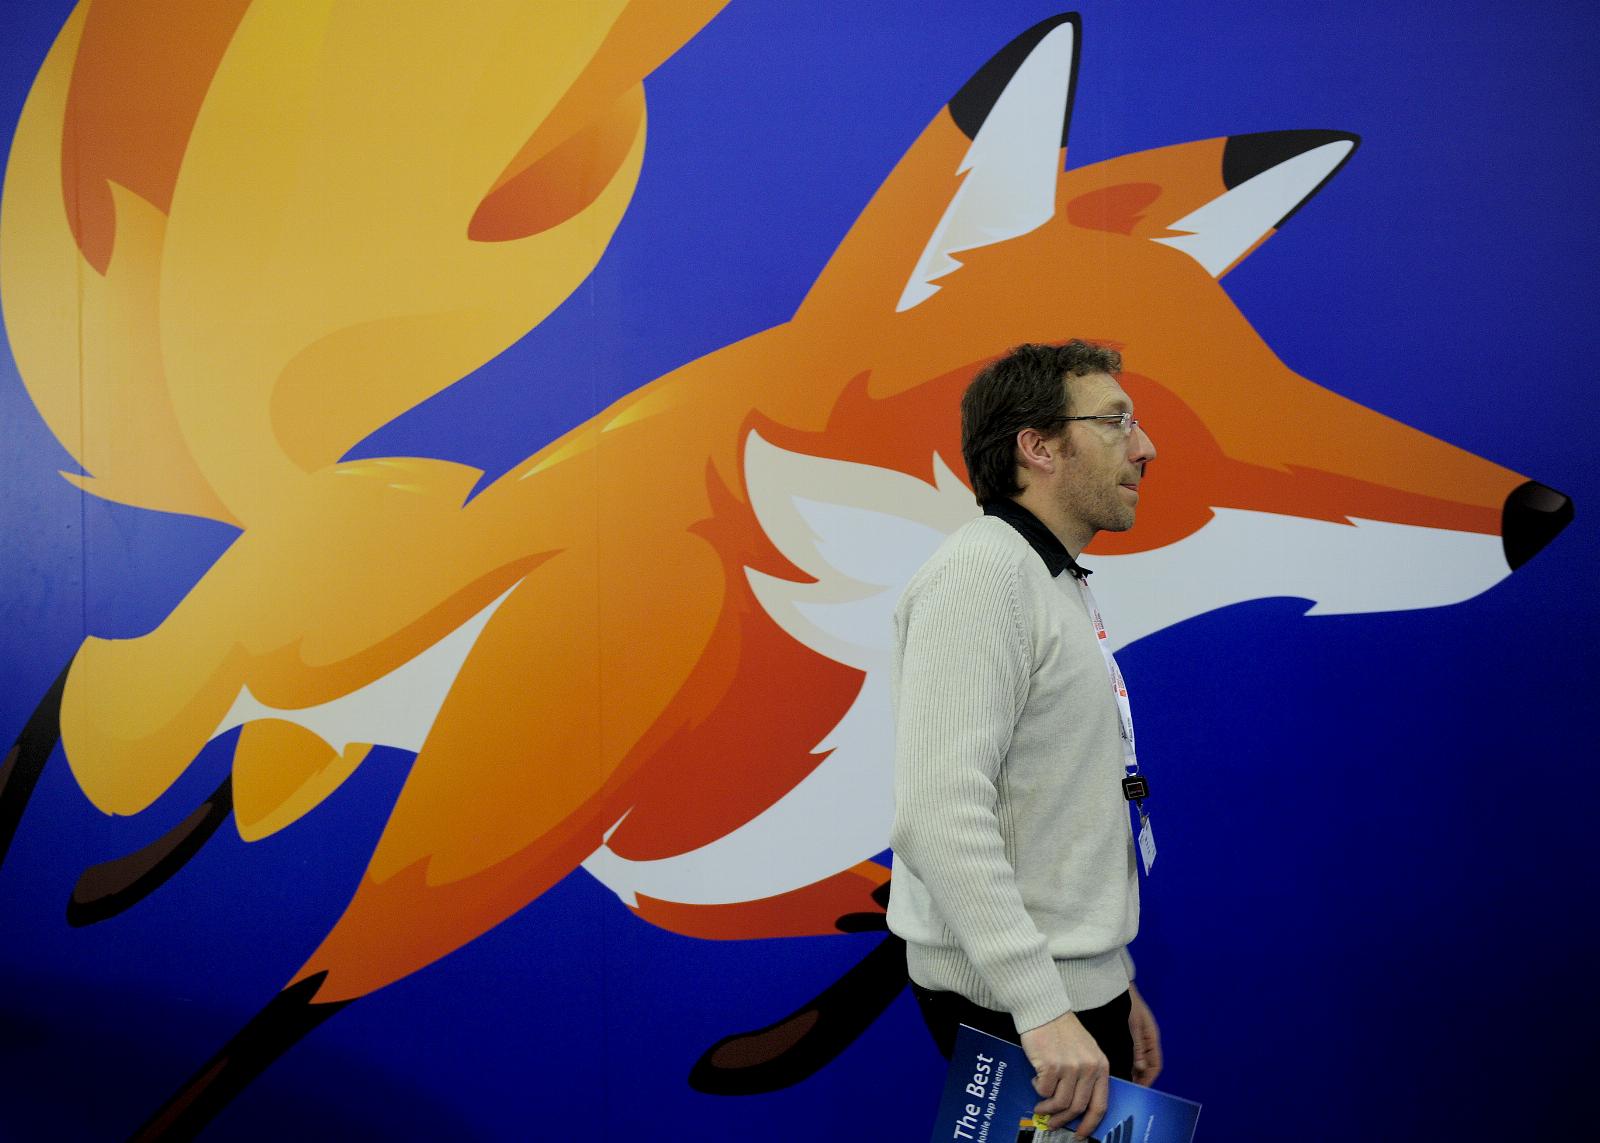 What’s next for Mozilla?